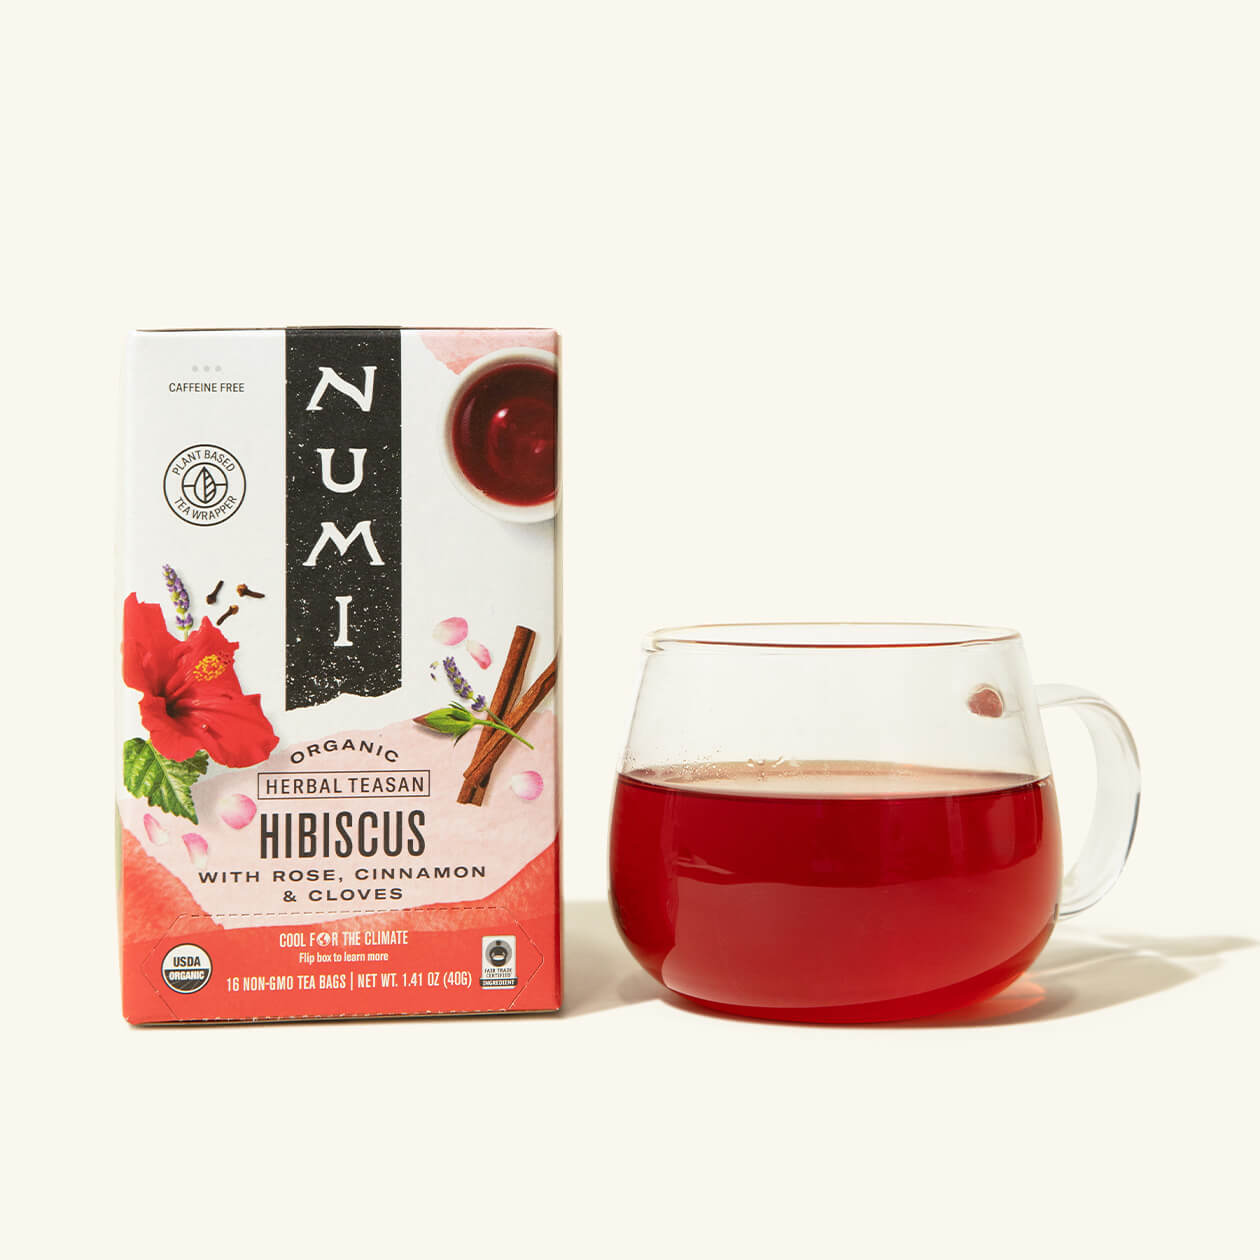 A box of Numi's Hibiscus next to a brewed cup of tea in a clear cup